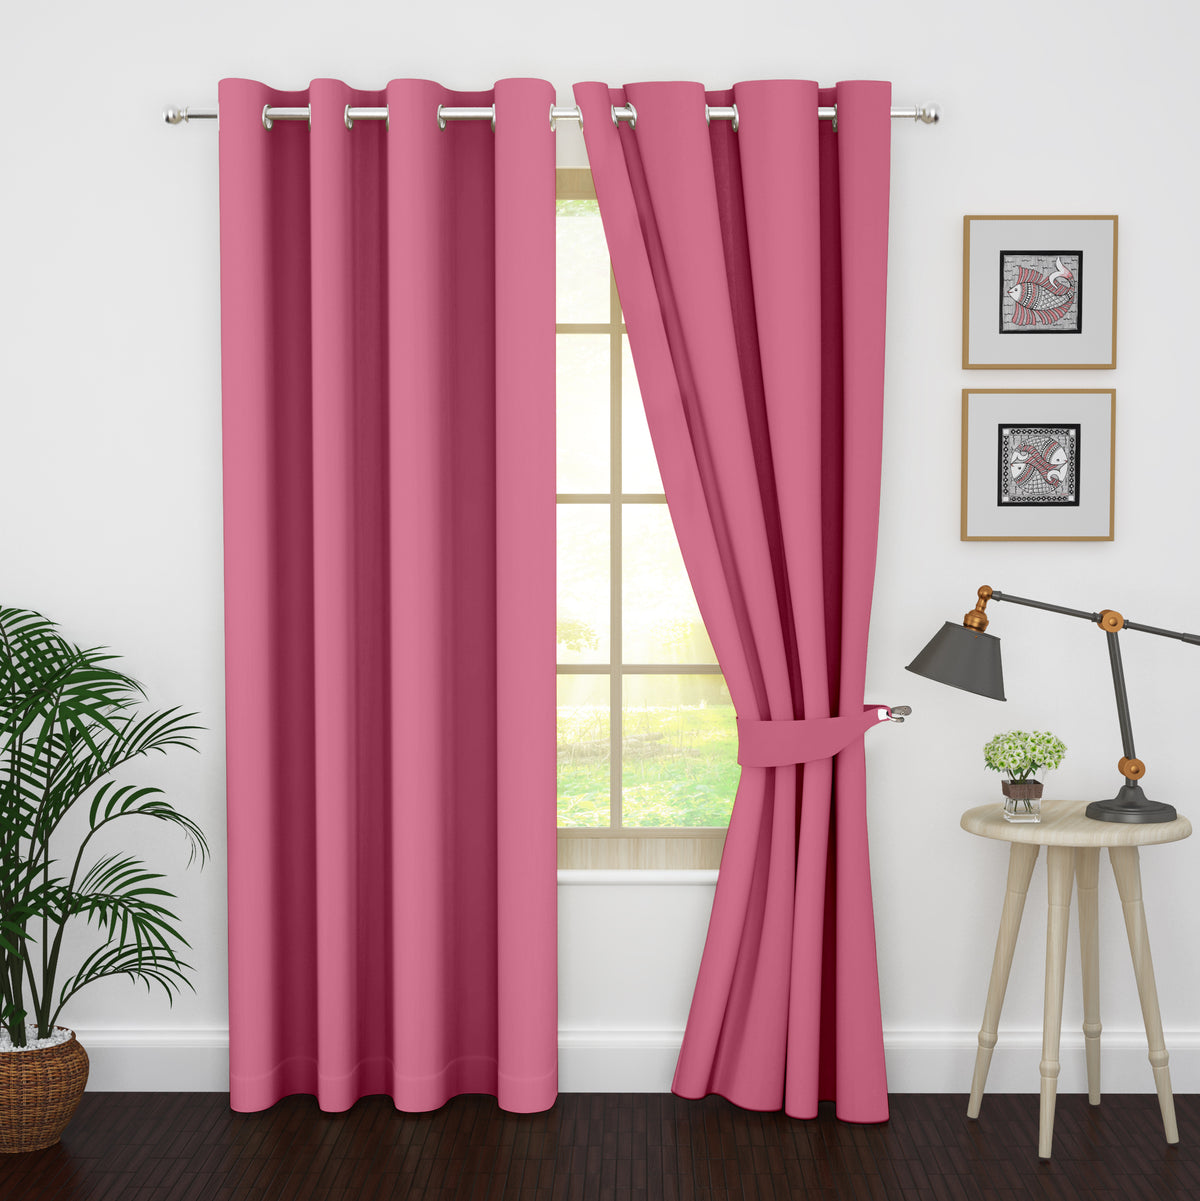 Blackout Curtains - Pack of 2